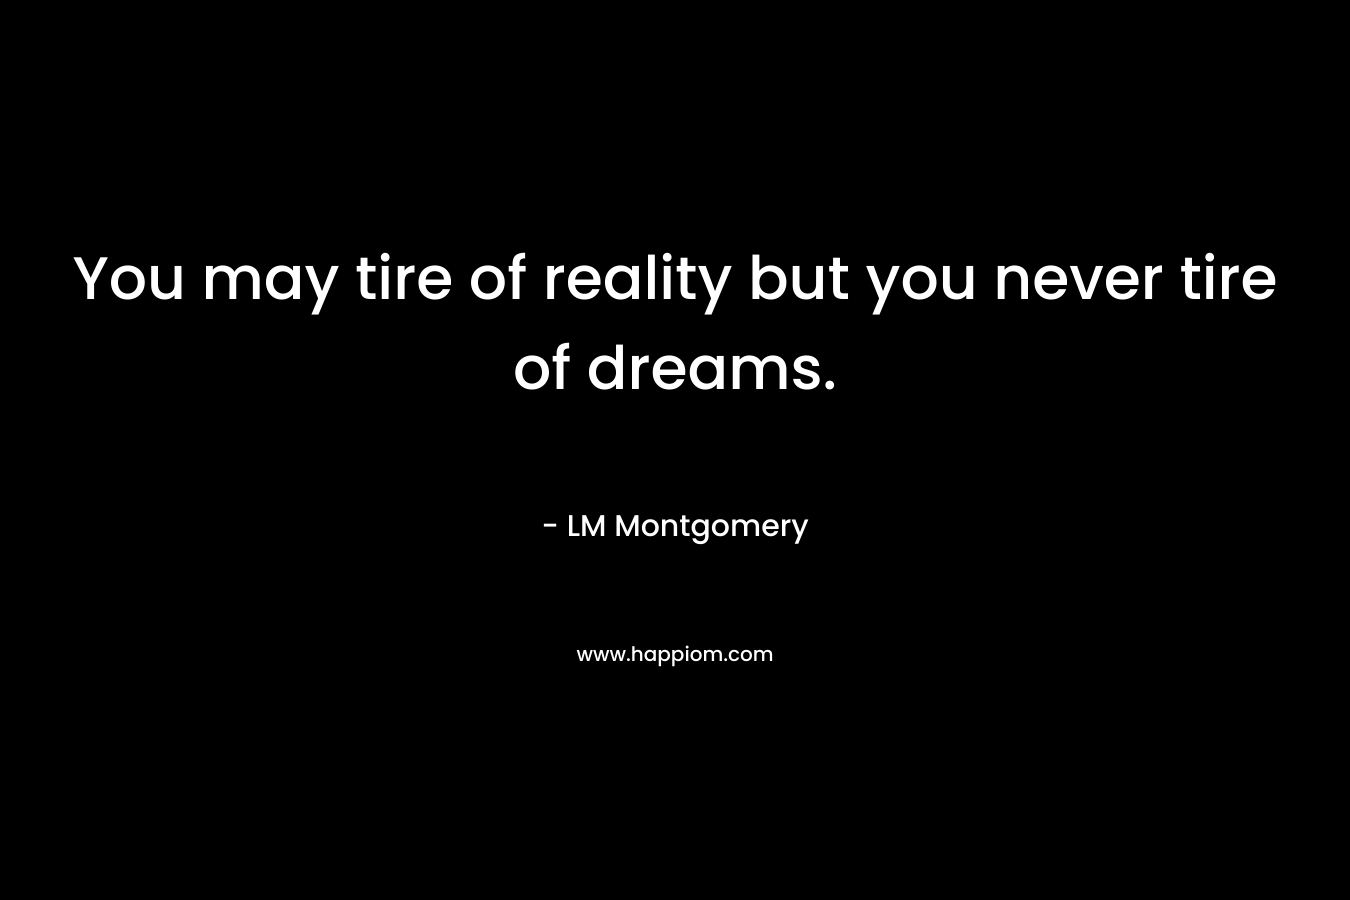 You may tire of reality but you never tire of dreams.